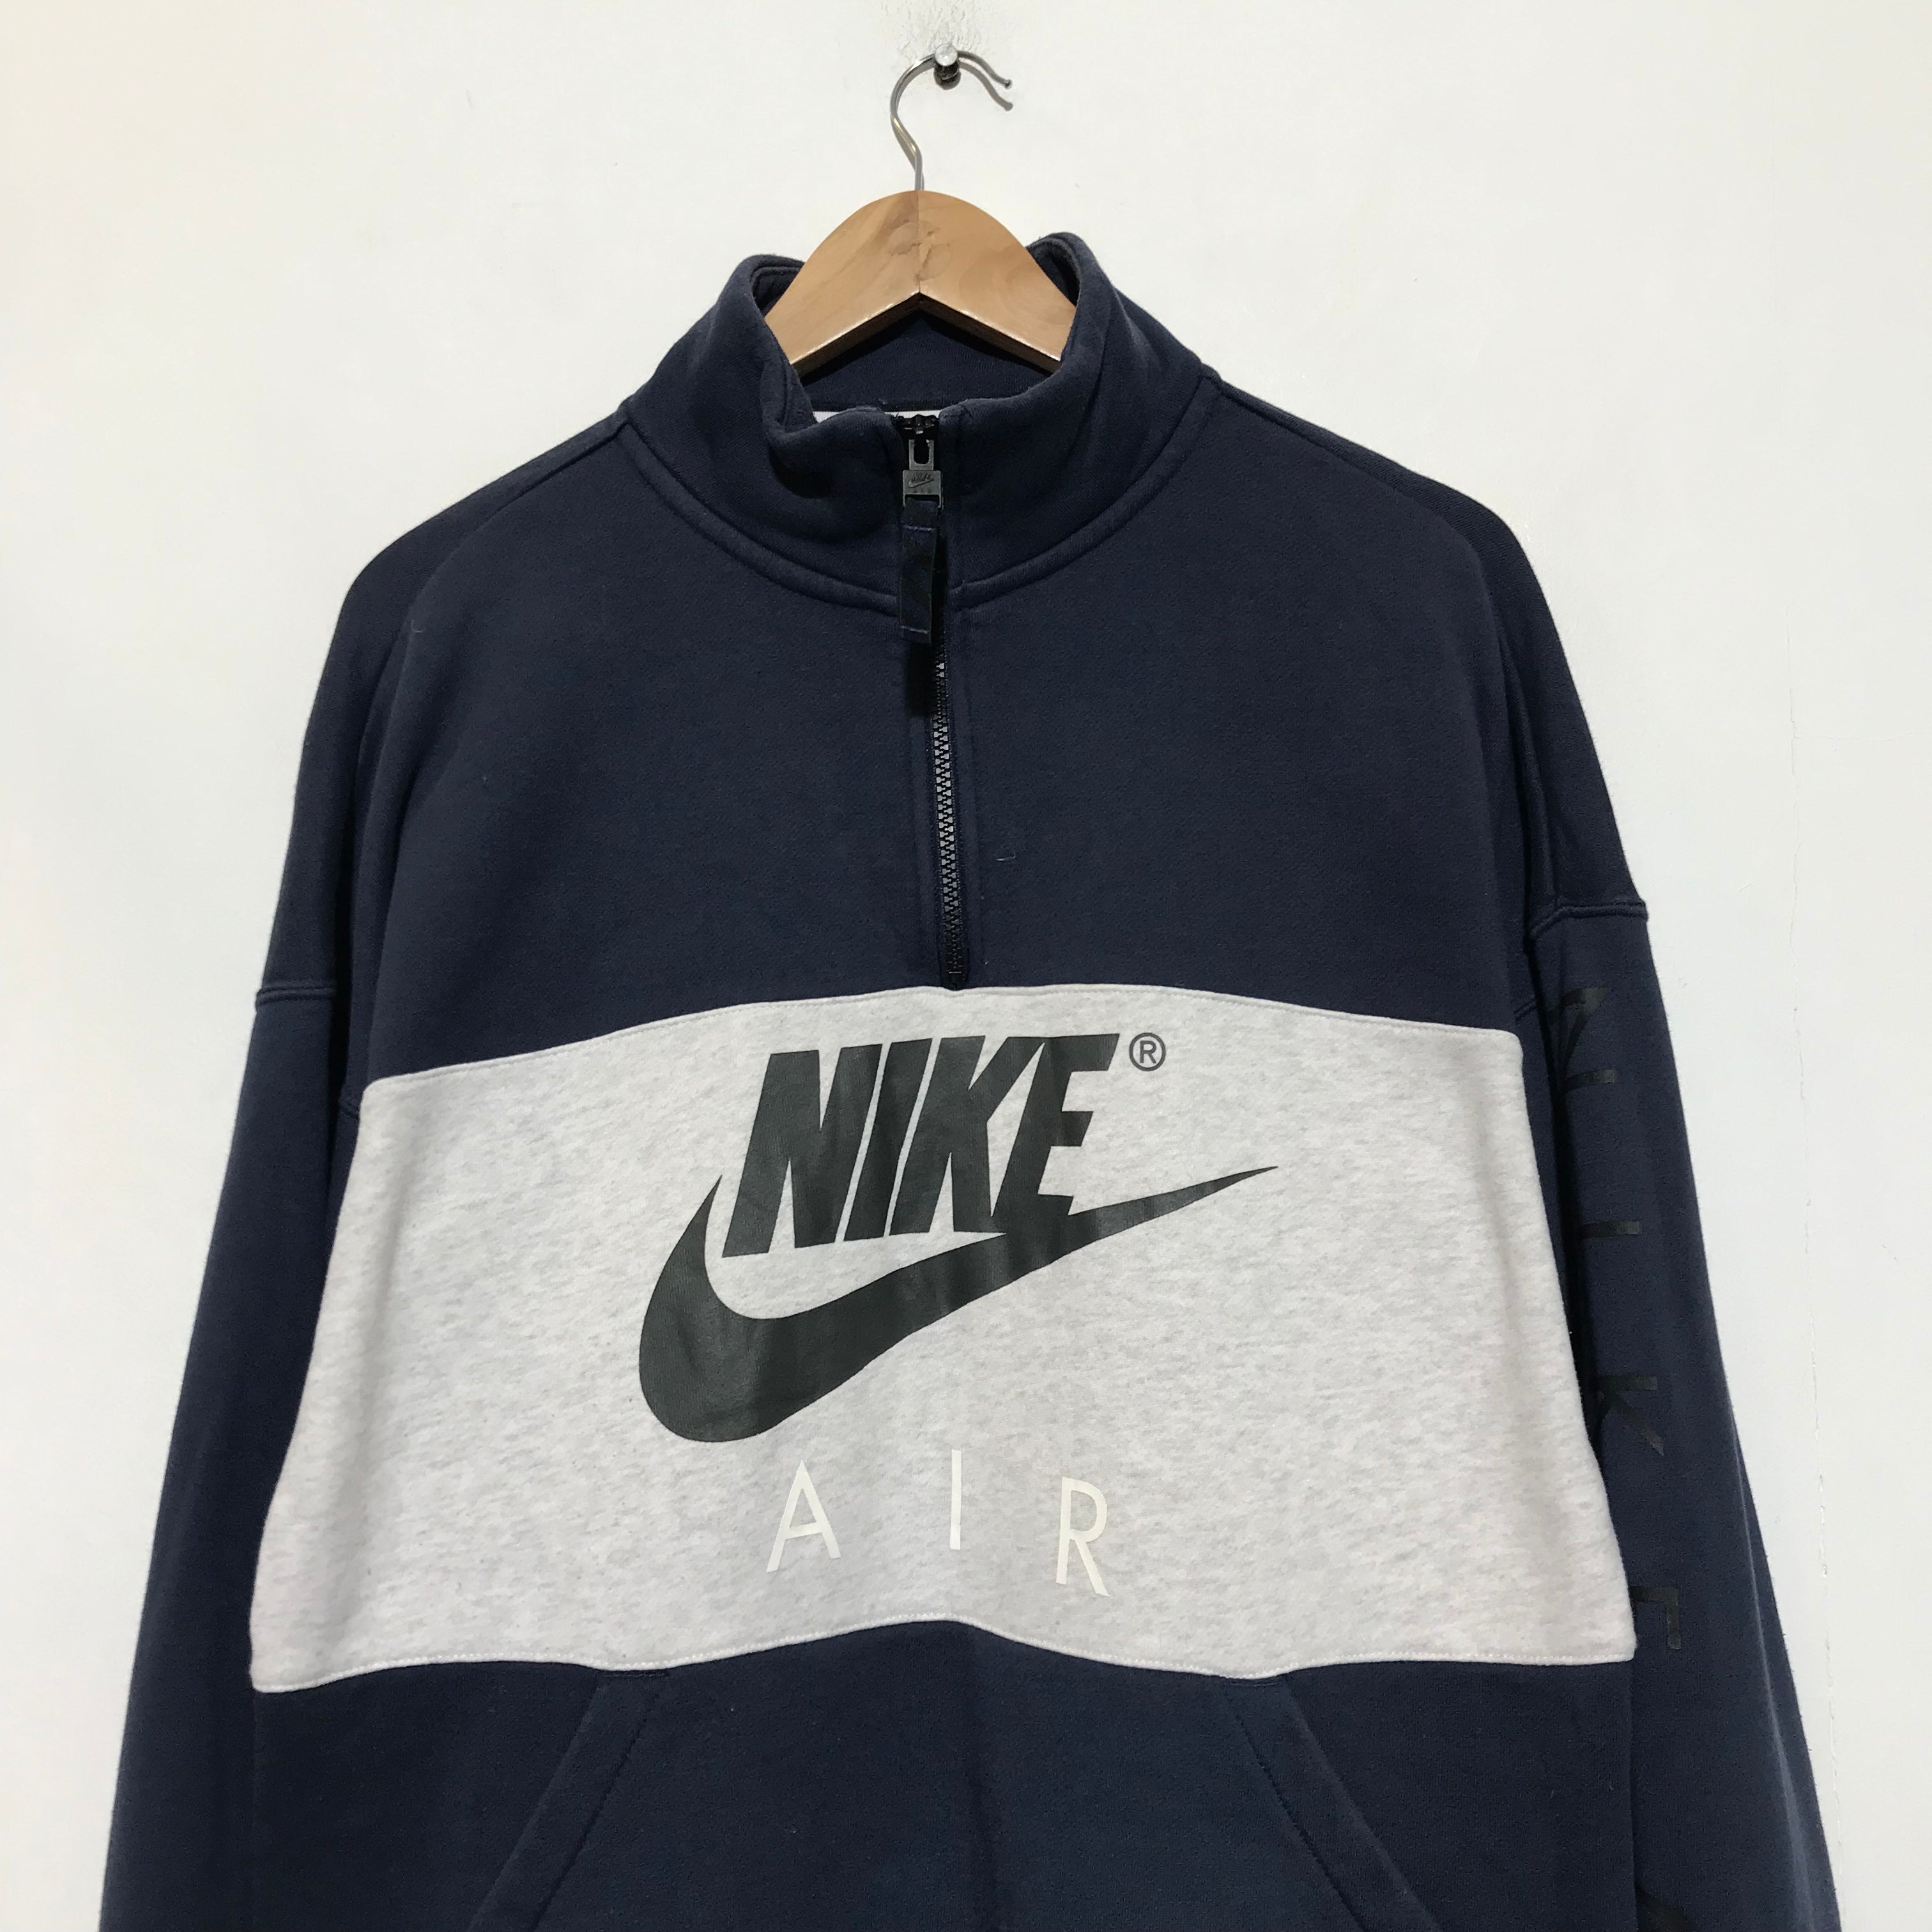 Nike Products | Leech Vintage